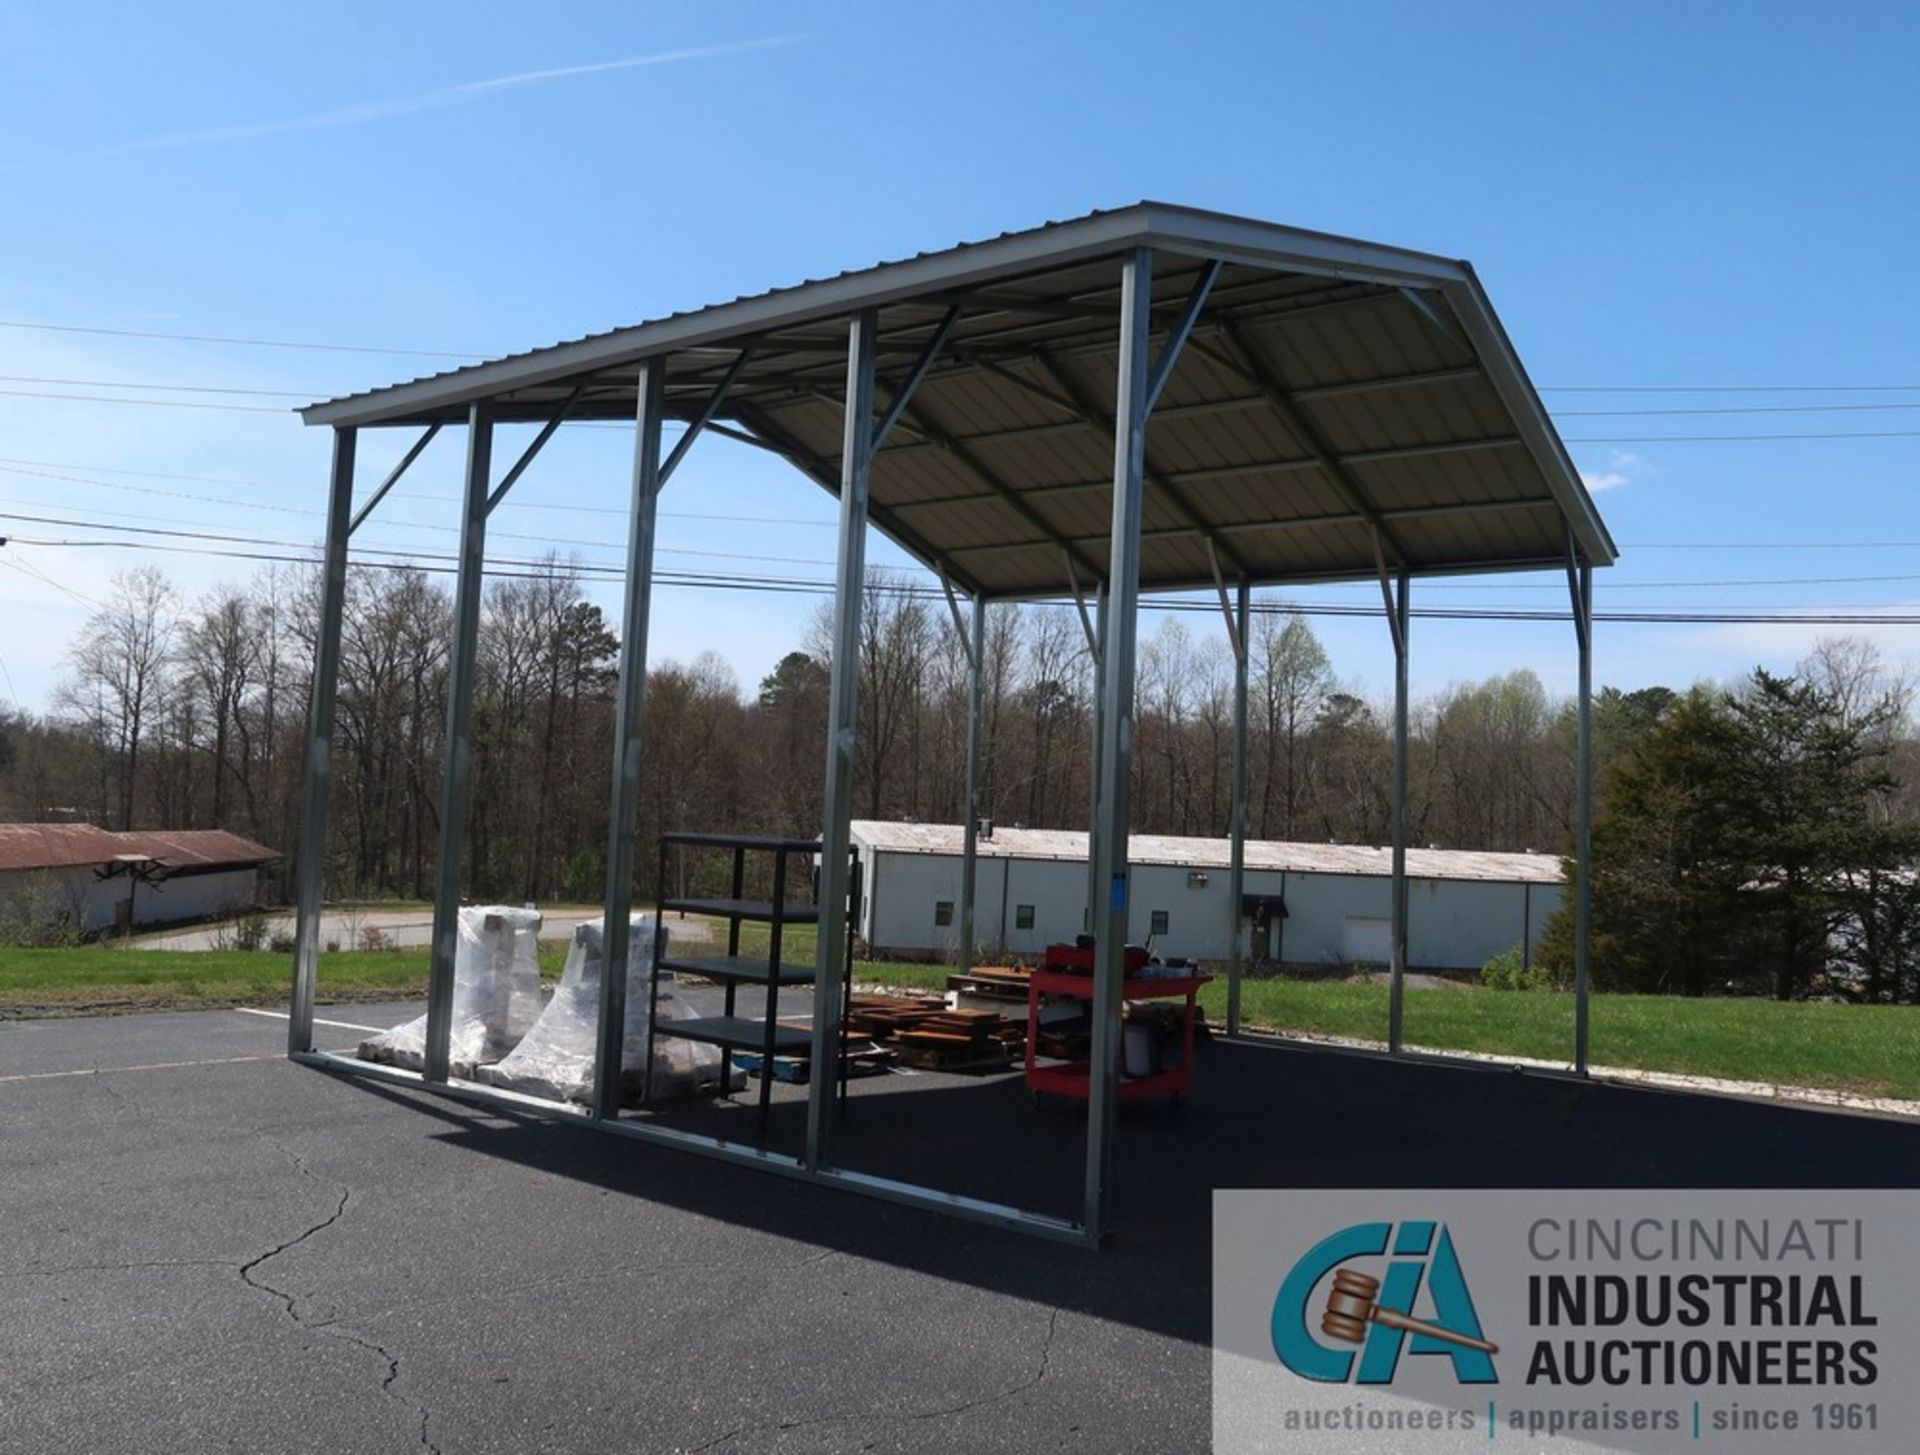 20' DEEP X 24' WIDE X 20' HIGH AT PEAK (APPROX.) GABLE ROOF OPEN AIR CARPORT - Image 2 of 5